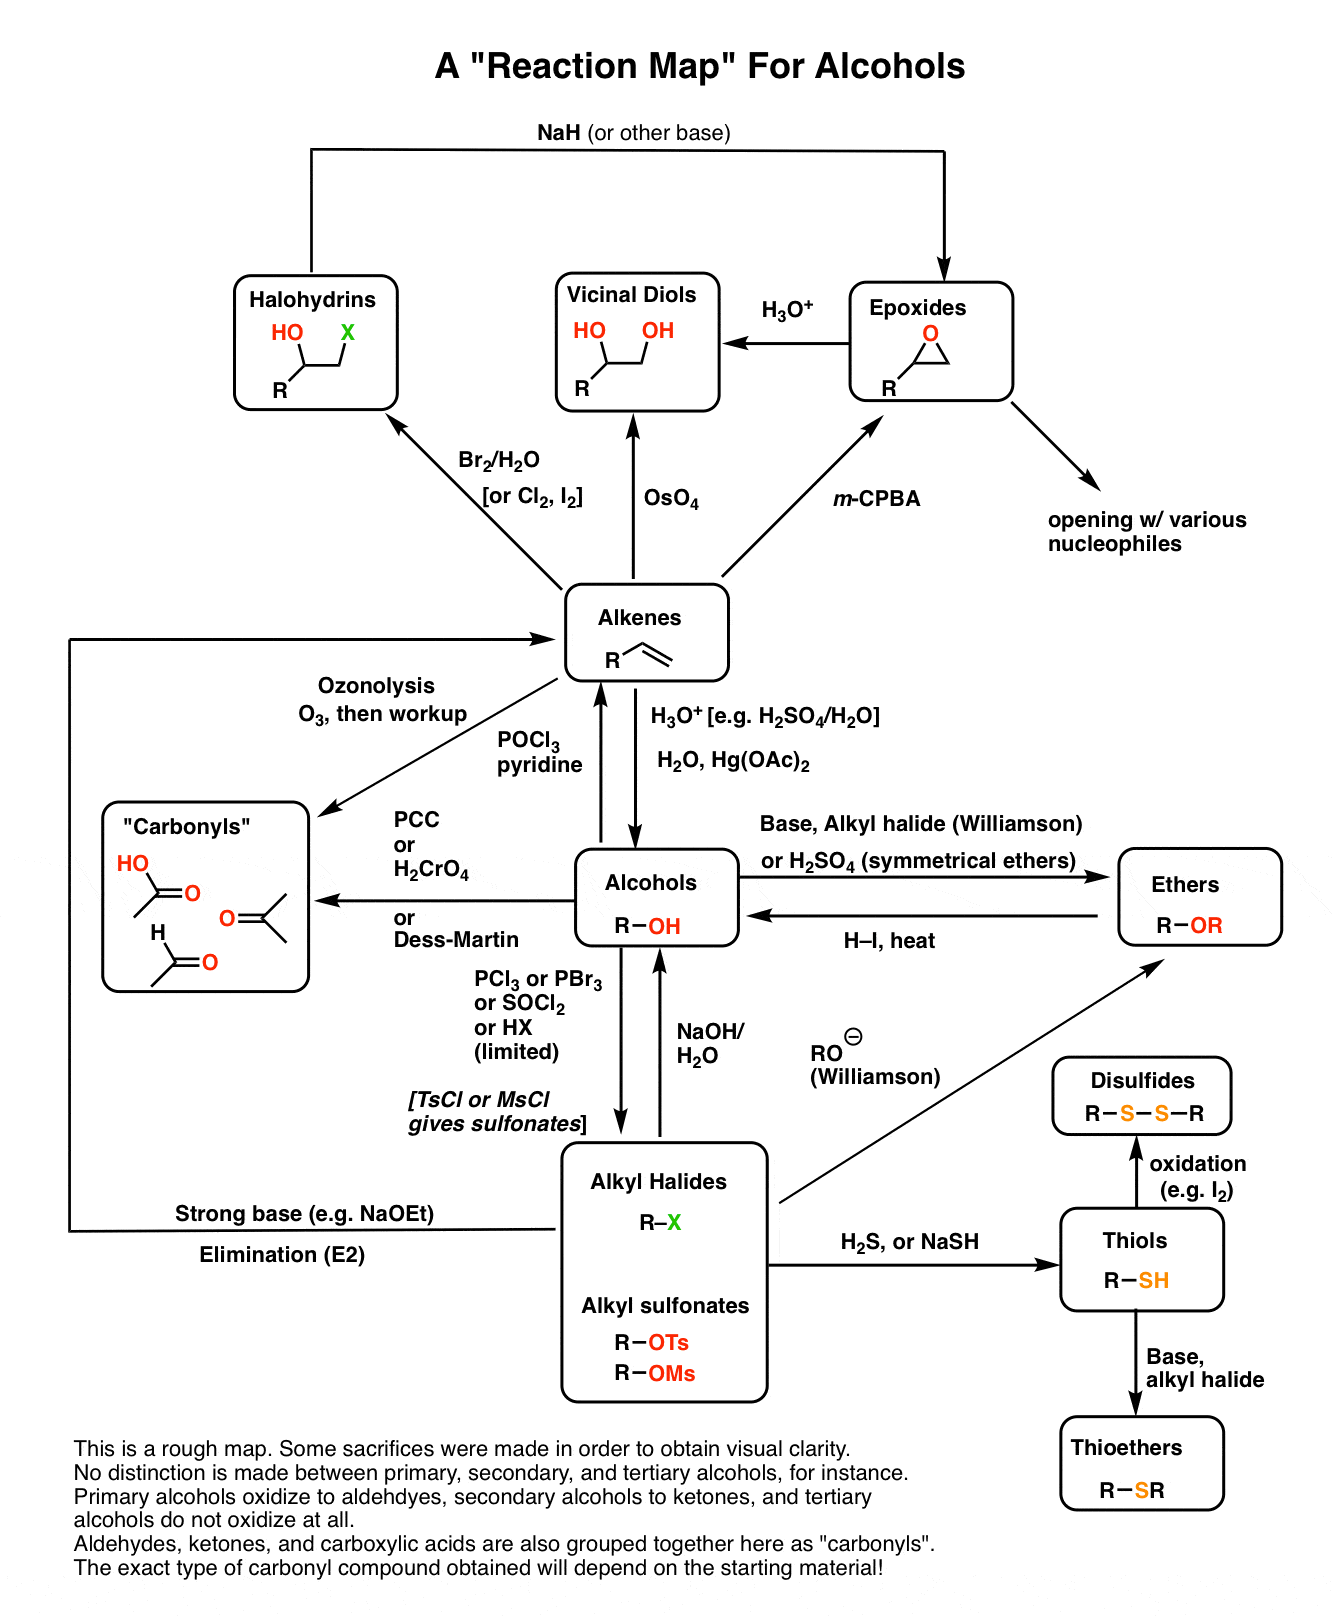 reaction-map-for-alcohols-alkenes-alcohols-ethers-carbonyls-oxidation-formation-of-alkyl-halides-tosylates-elimination-roadmap